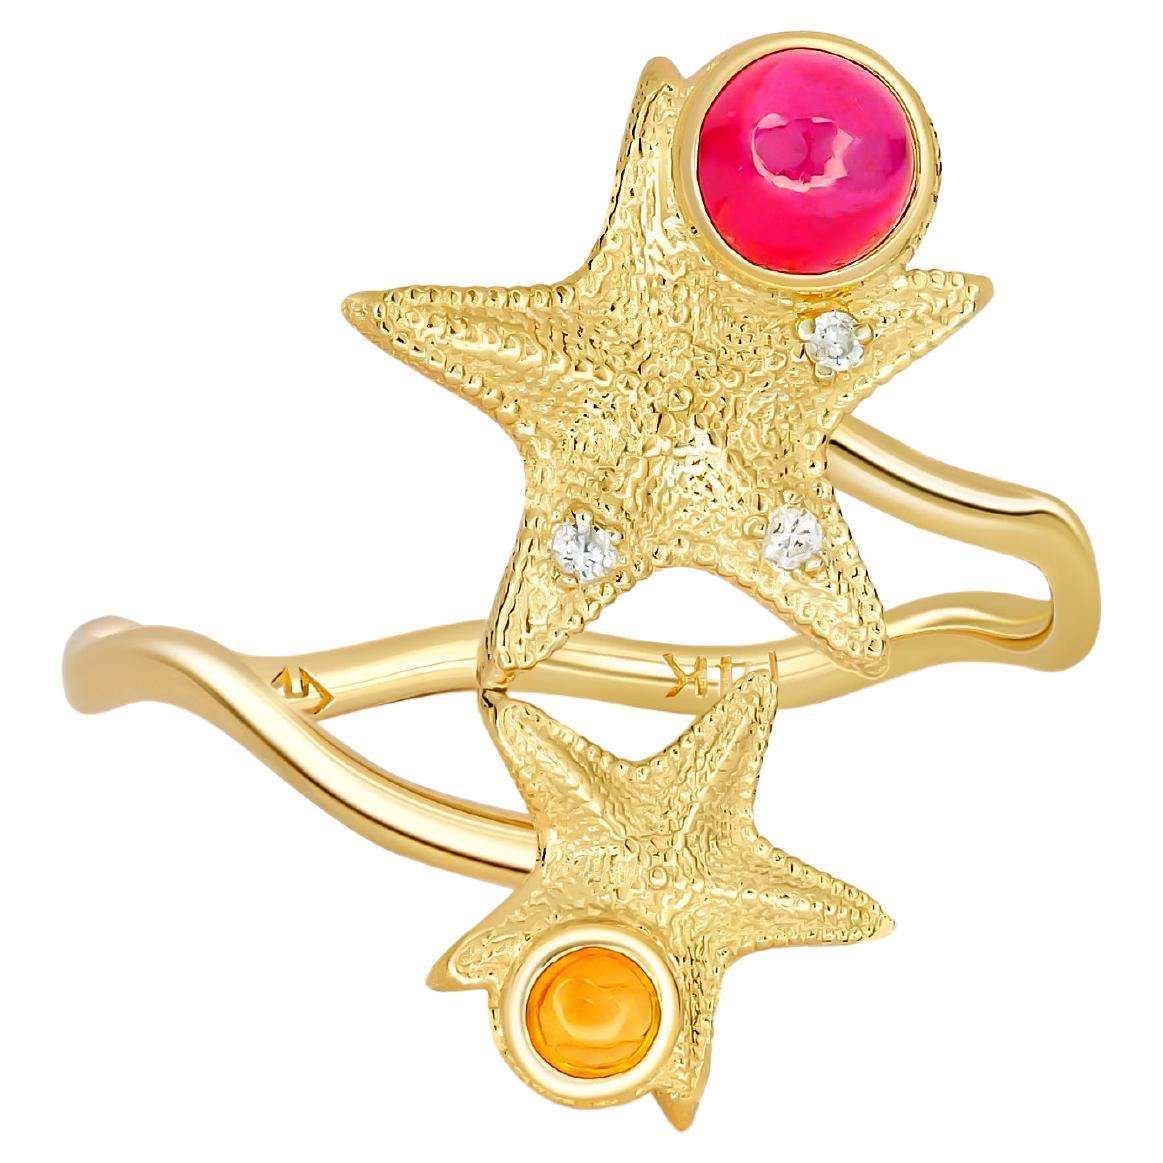 For Sale:   Ruby and Sapphire cabochon ring in 14 karat gold.  Star Fish Ring!